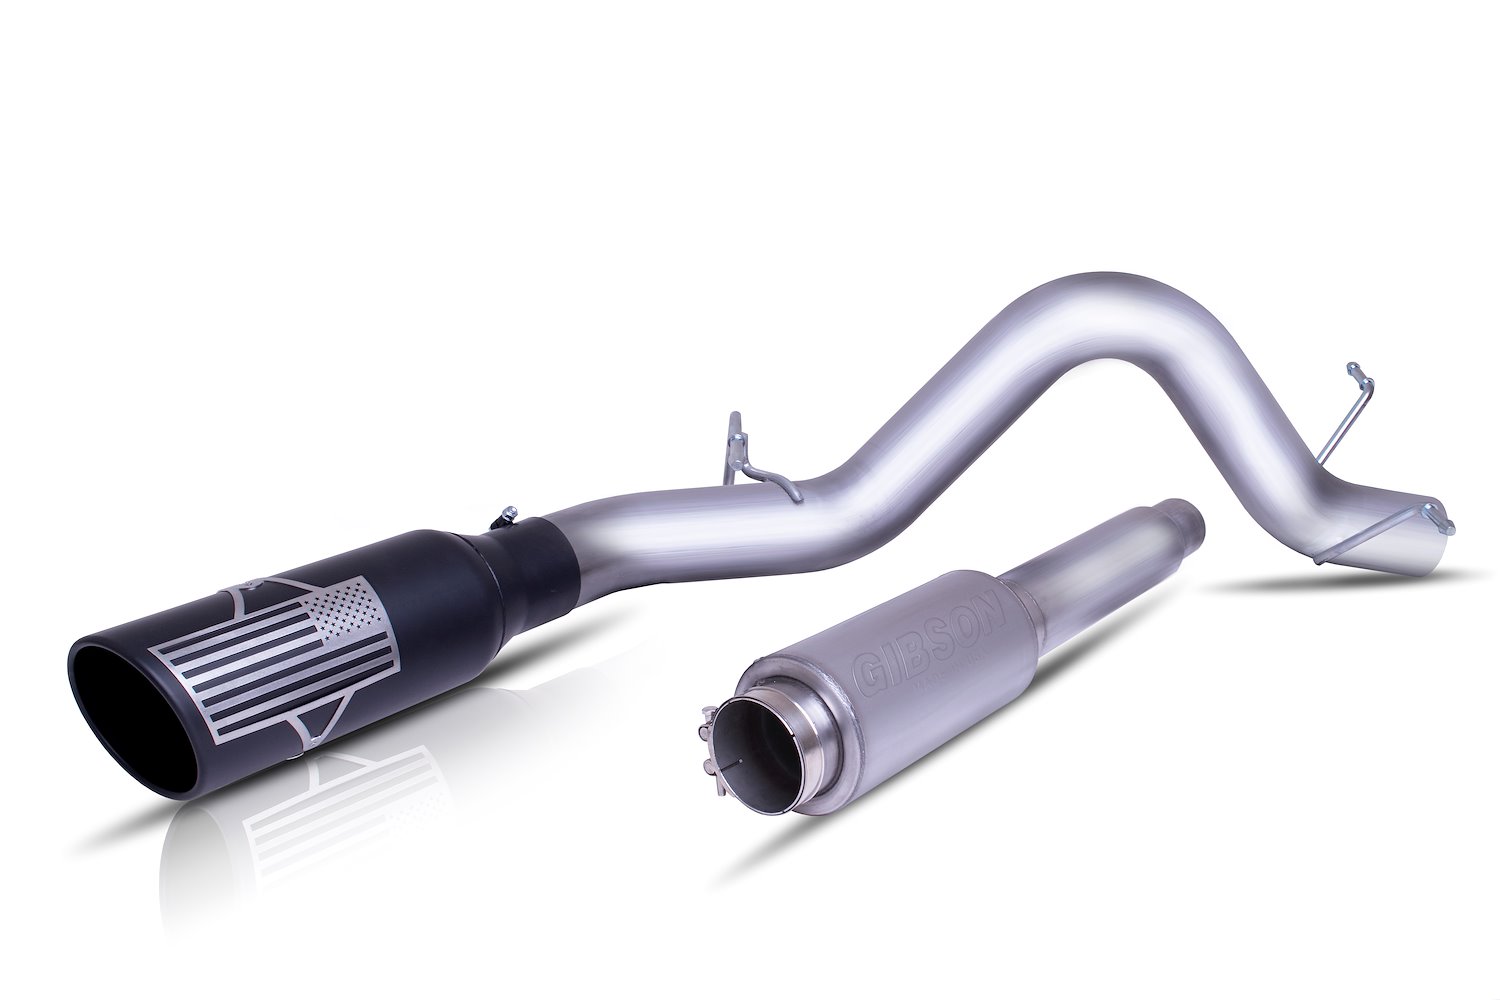 Patriot Series Cat-Back Exhaust System for 2014-Up Chevy Silverado/GMC Sierra